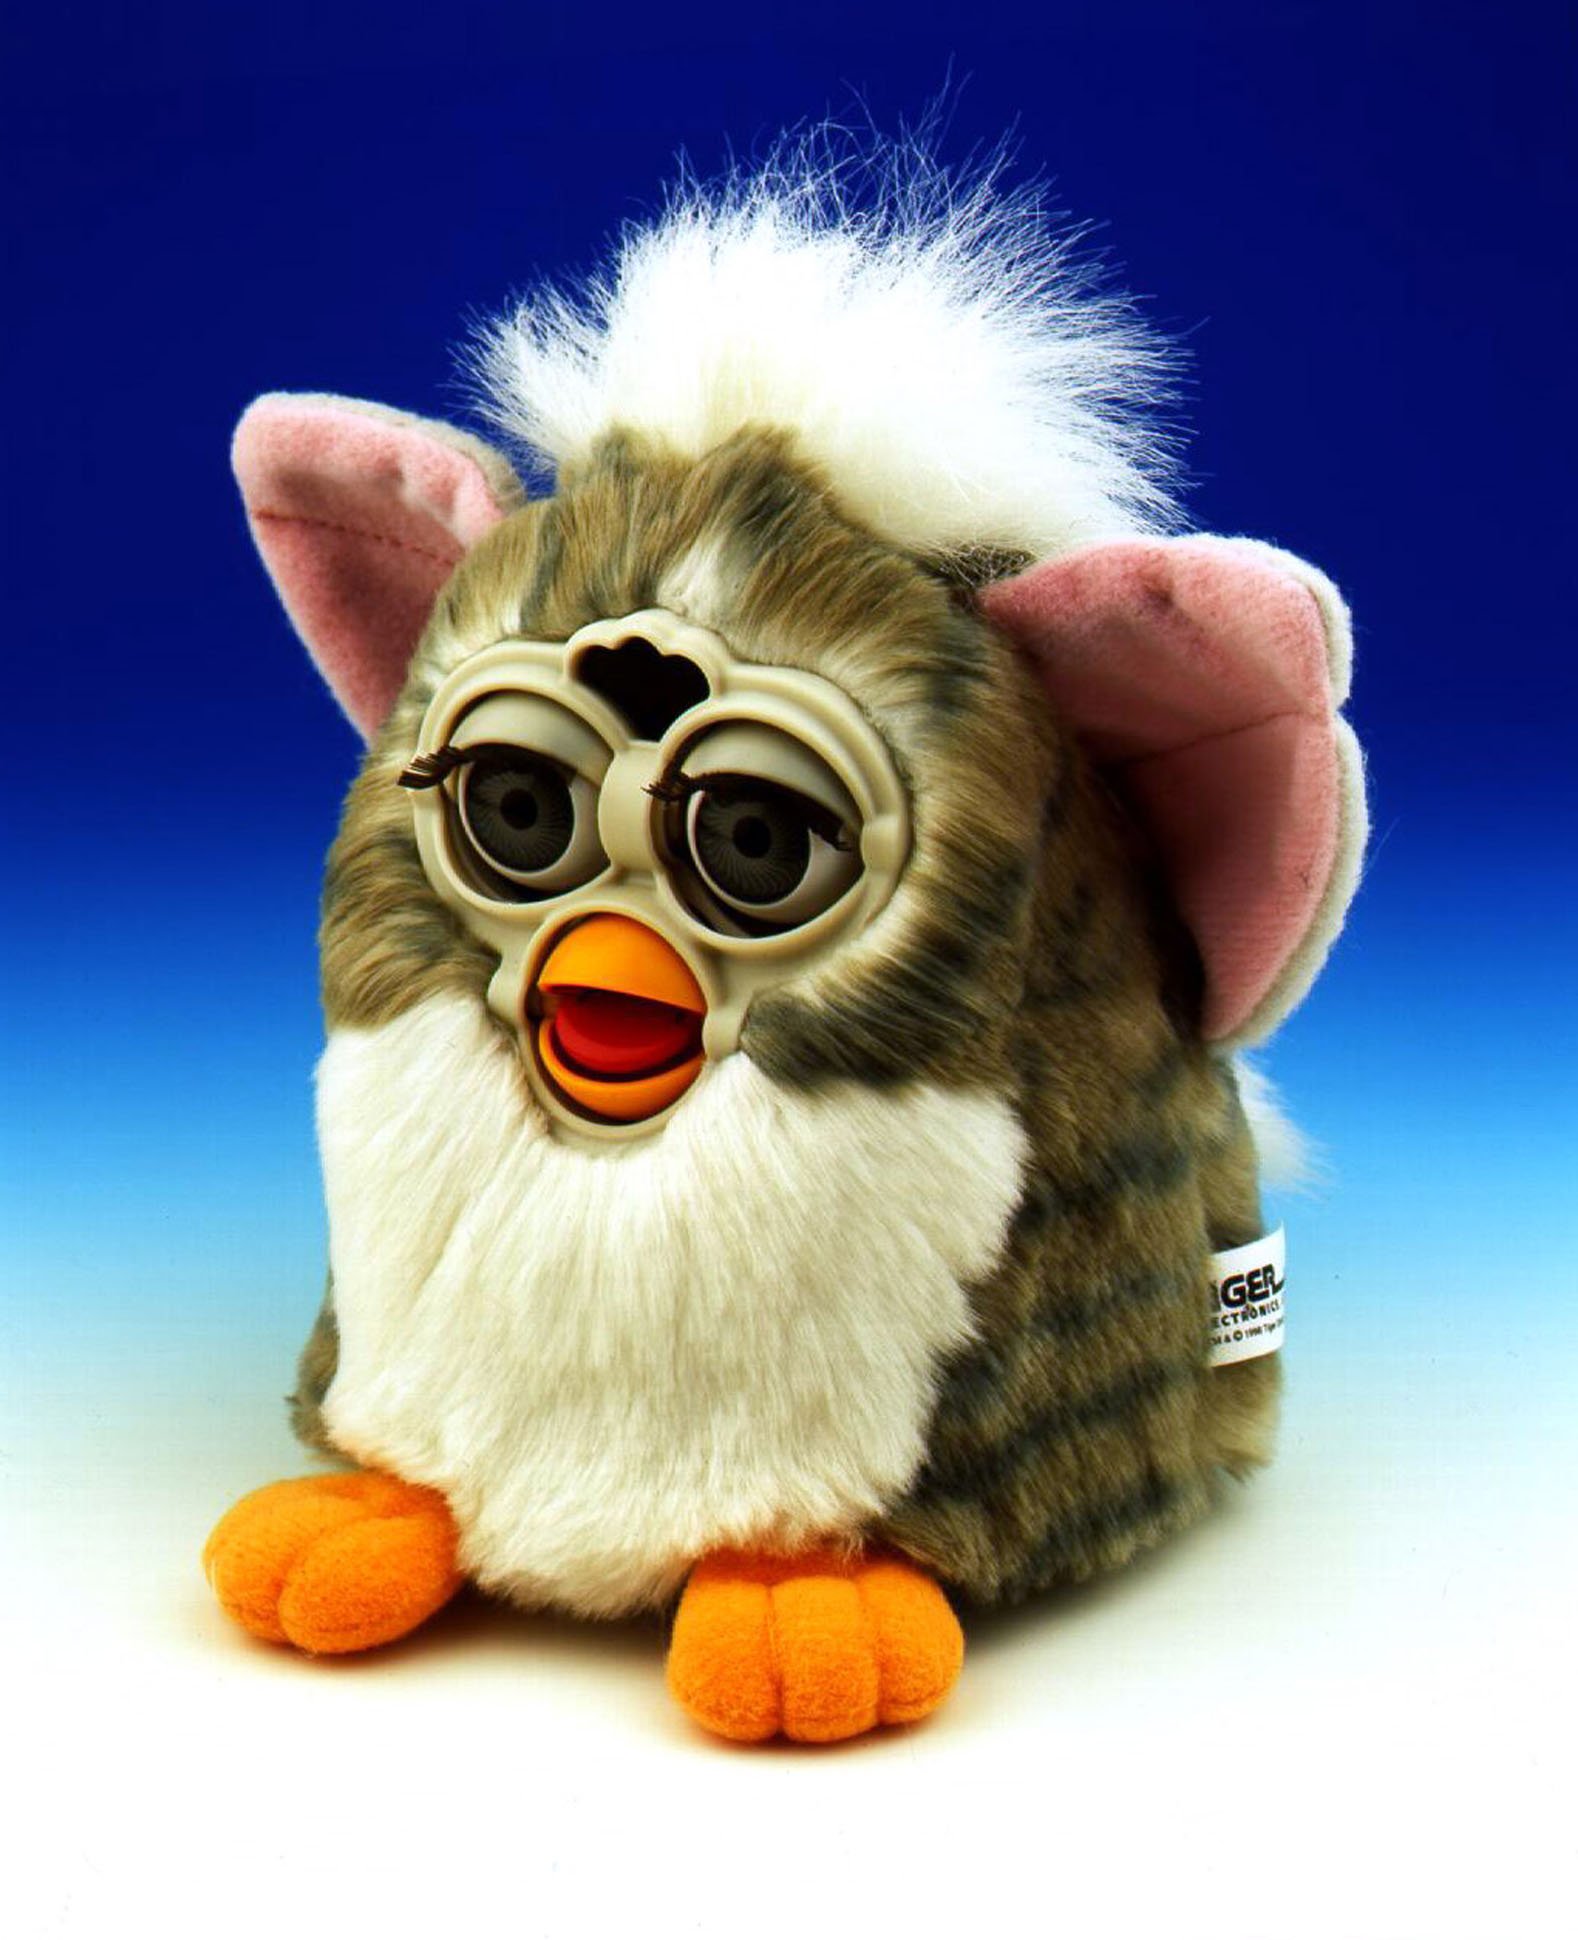 A new interactive toy, Furby, made by Tiger Electronics, is expected to be the latest craze with kids. The cuddly standalone animatronic pet, interacts with the environment through sight, touch, hearing and physical orientation. The toy is scheduled for release October 2, 1998. (photo by ho)